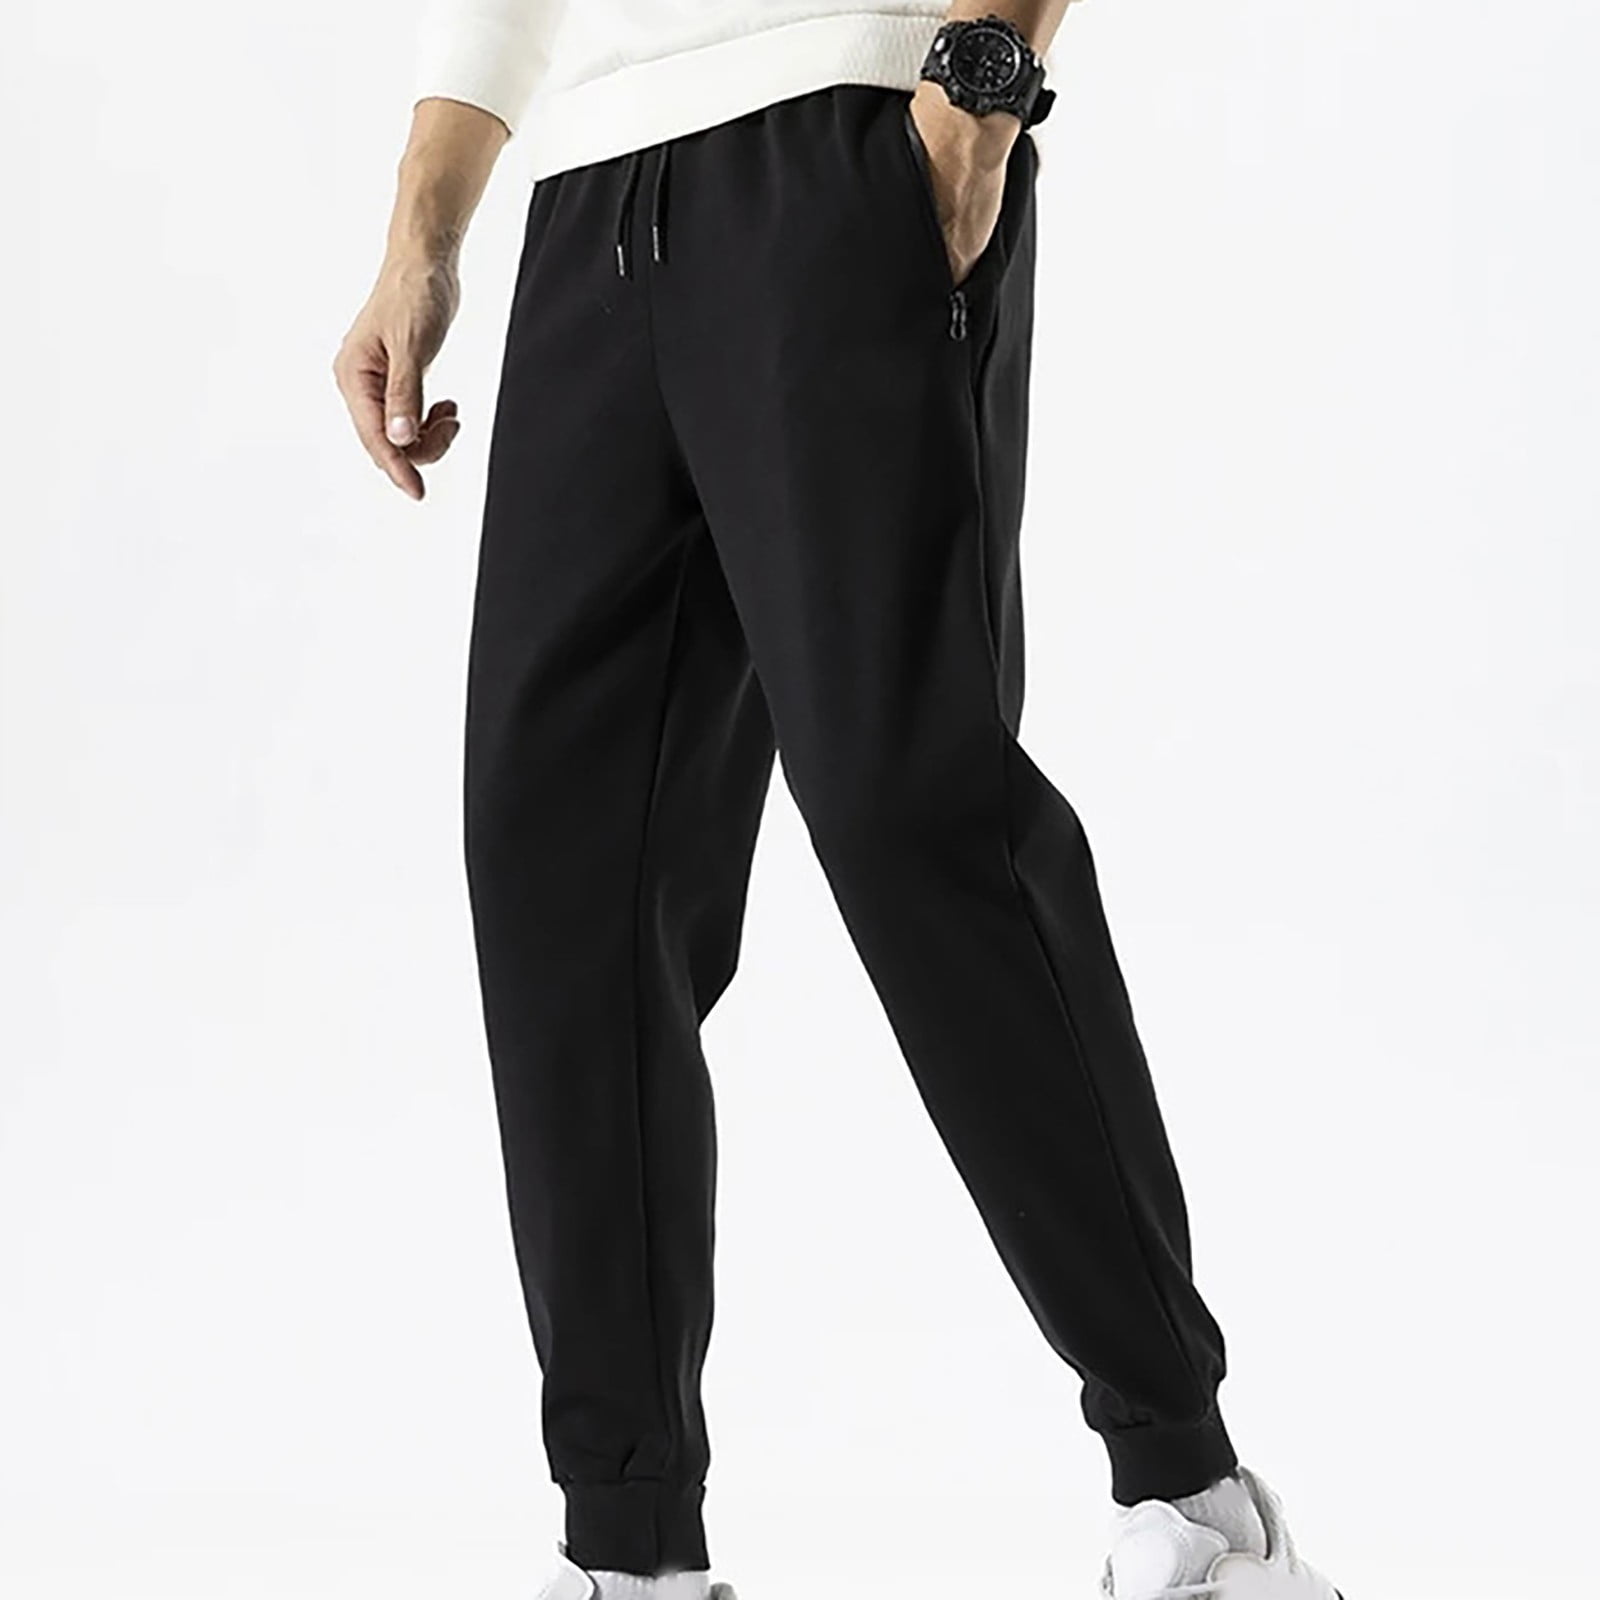 Hidden Player Men's Shorts, Regular Fit Half Track Pants, Lower Black :  Amazon.in: Clothing & Accessories